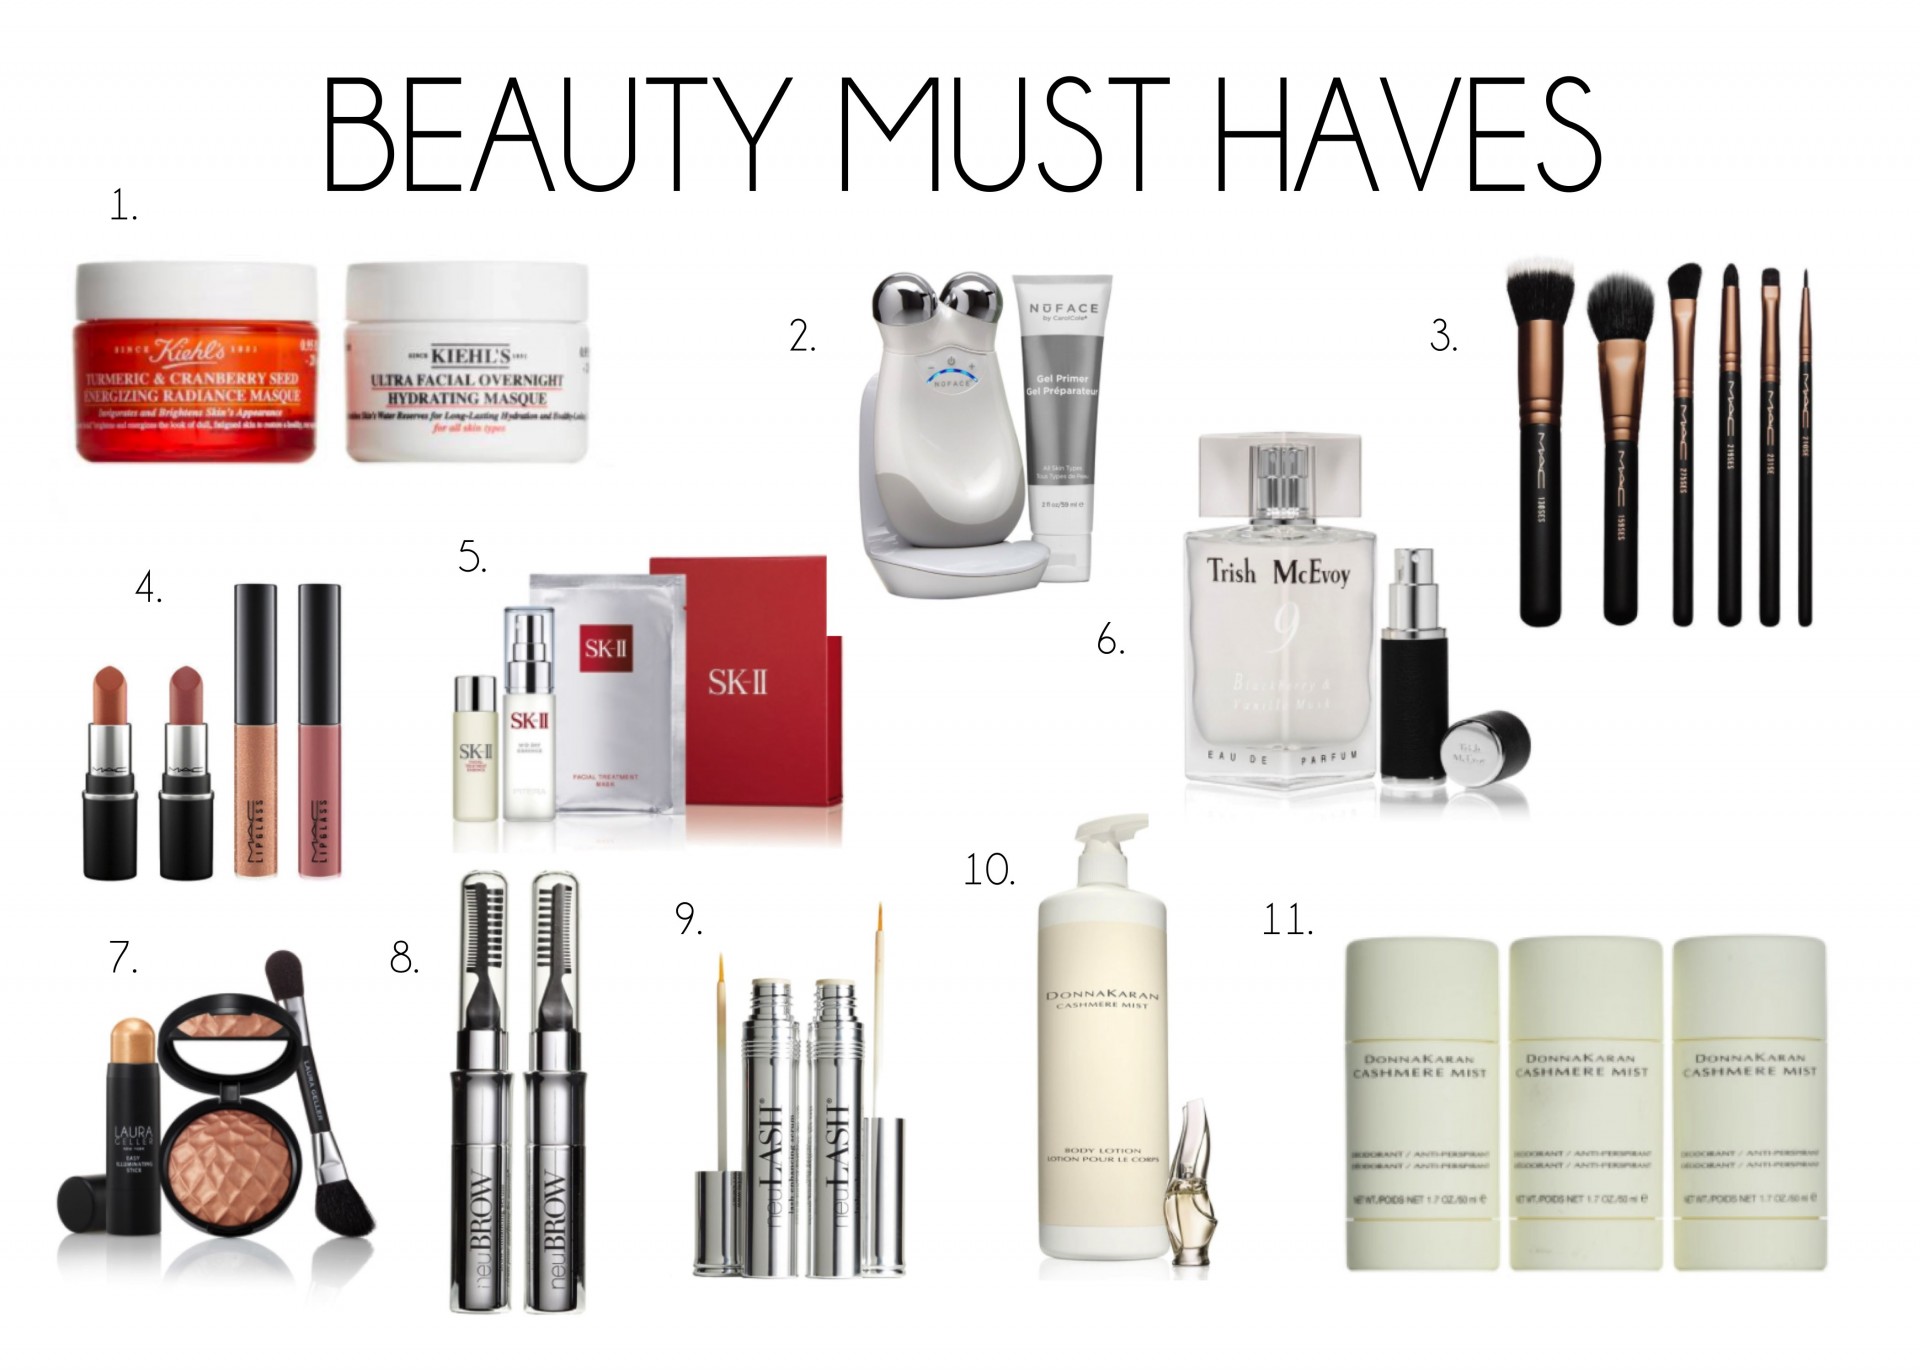 BEAUTY MUST HAVES